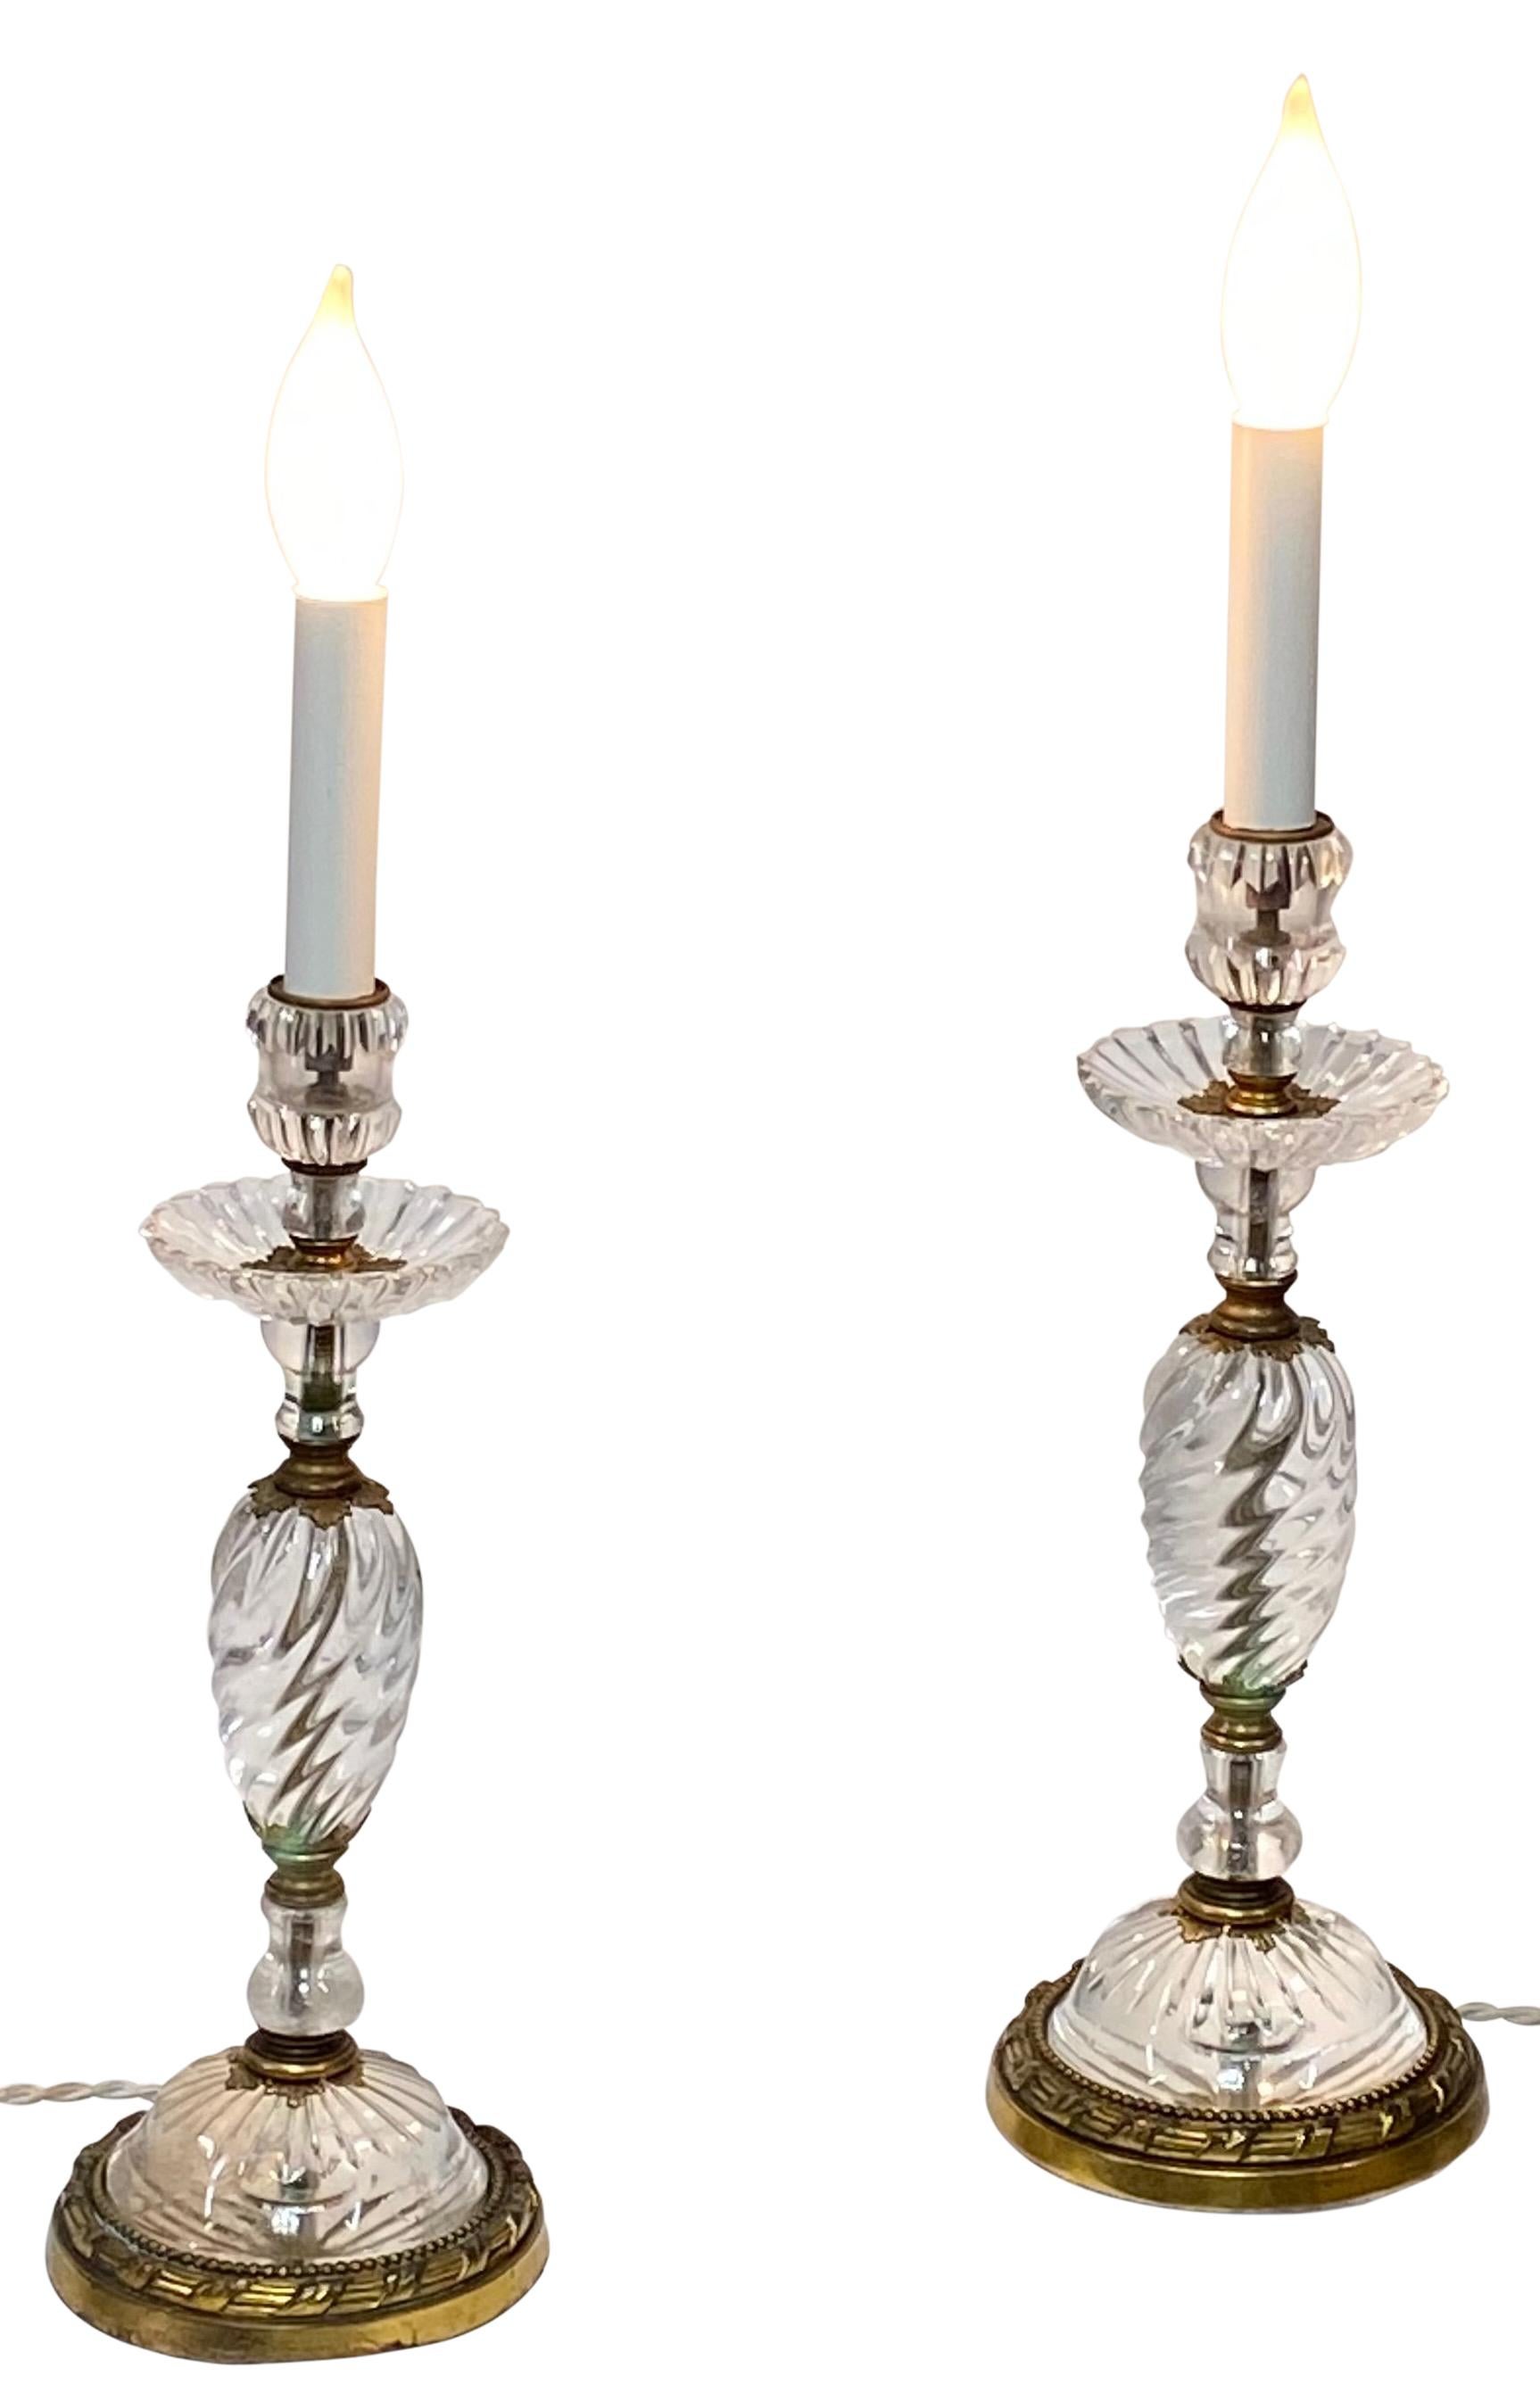 Pair of Early 19th Century French Rock Crystal Candle Stick Boudoir Lamps For Sale 2